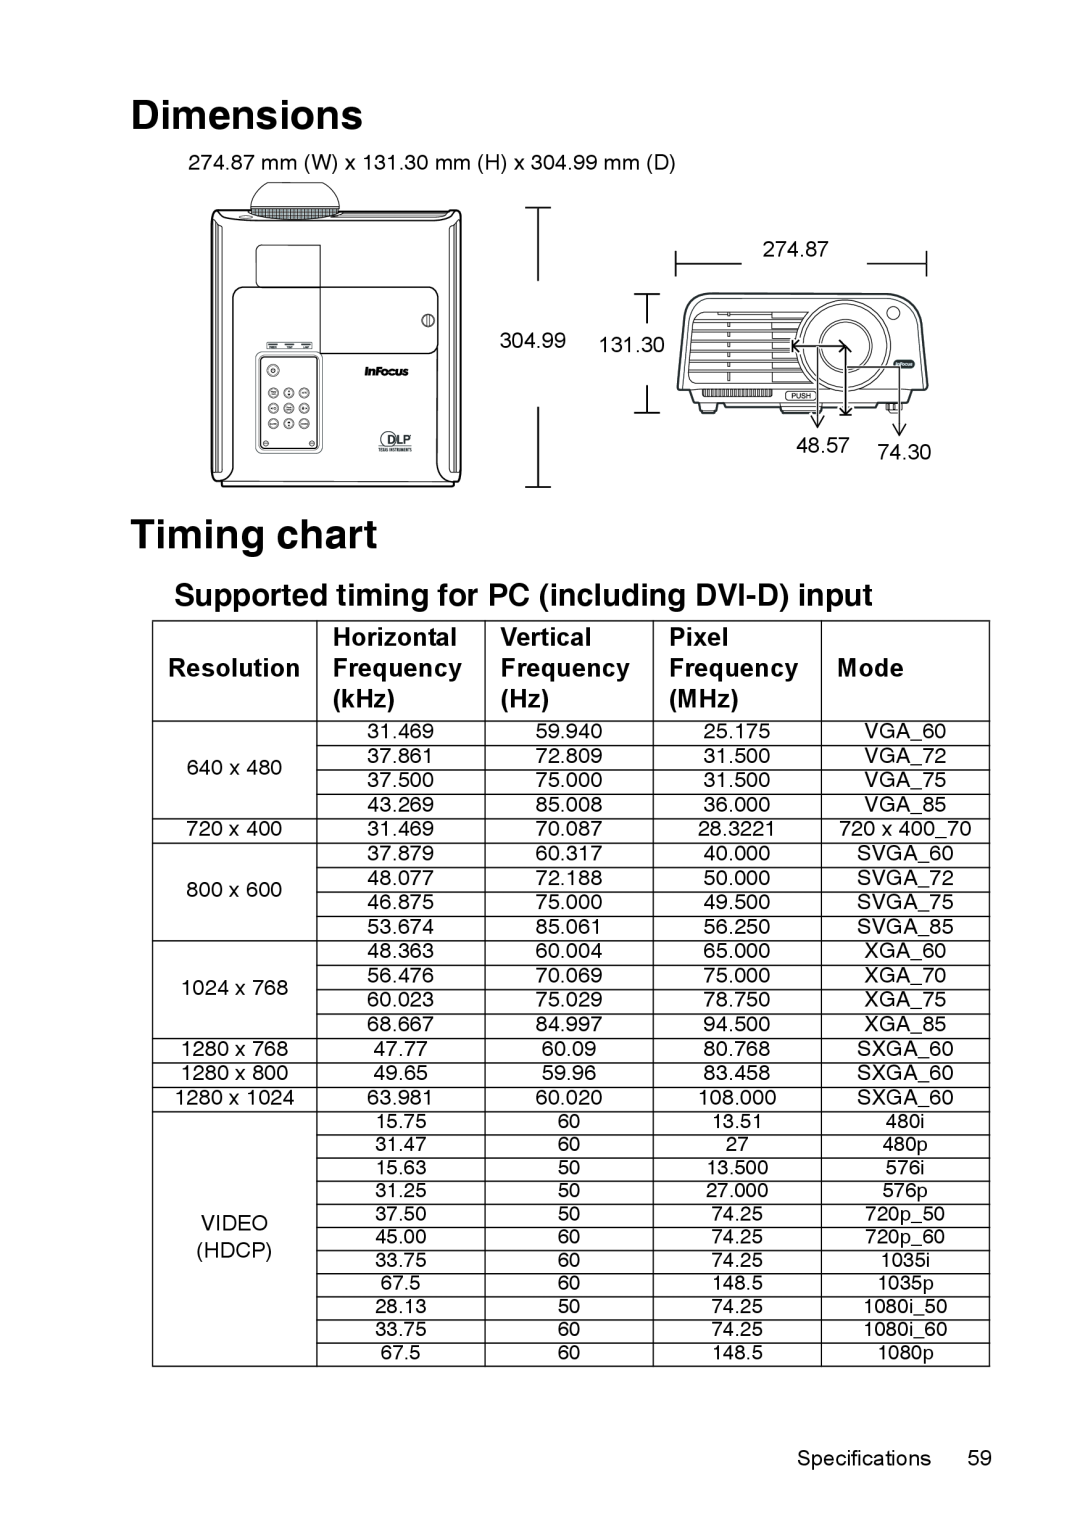 InFocus XS1 manual Dimensions, Timing chart, Supported timing for PC including DVI-D input 